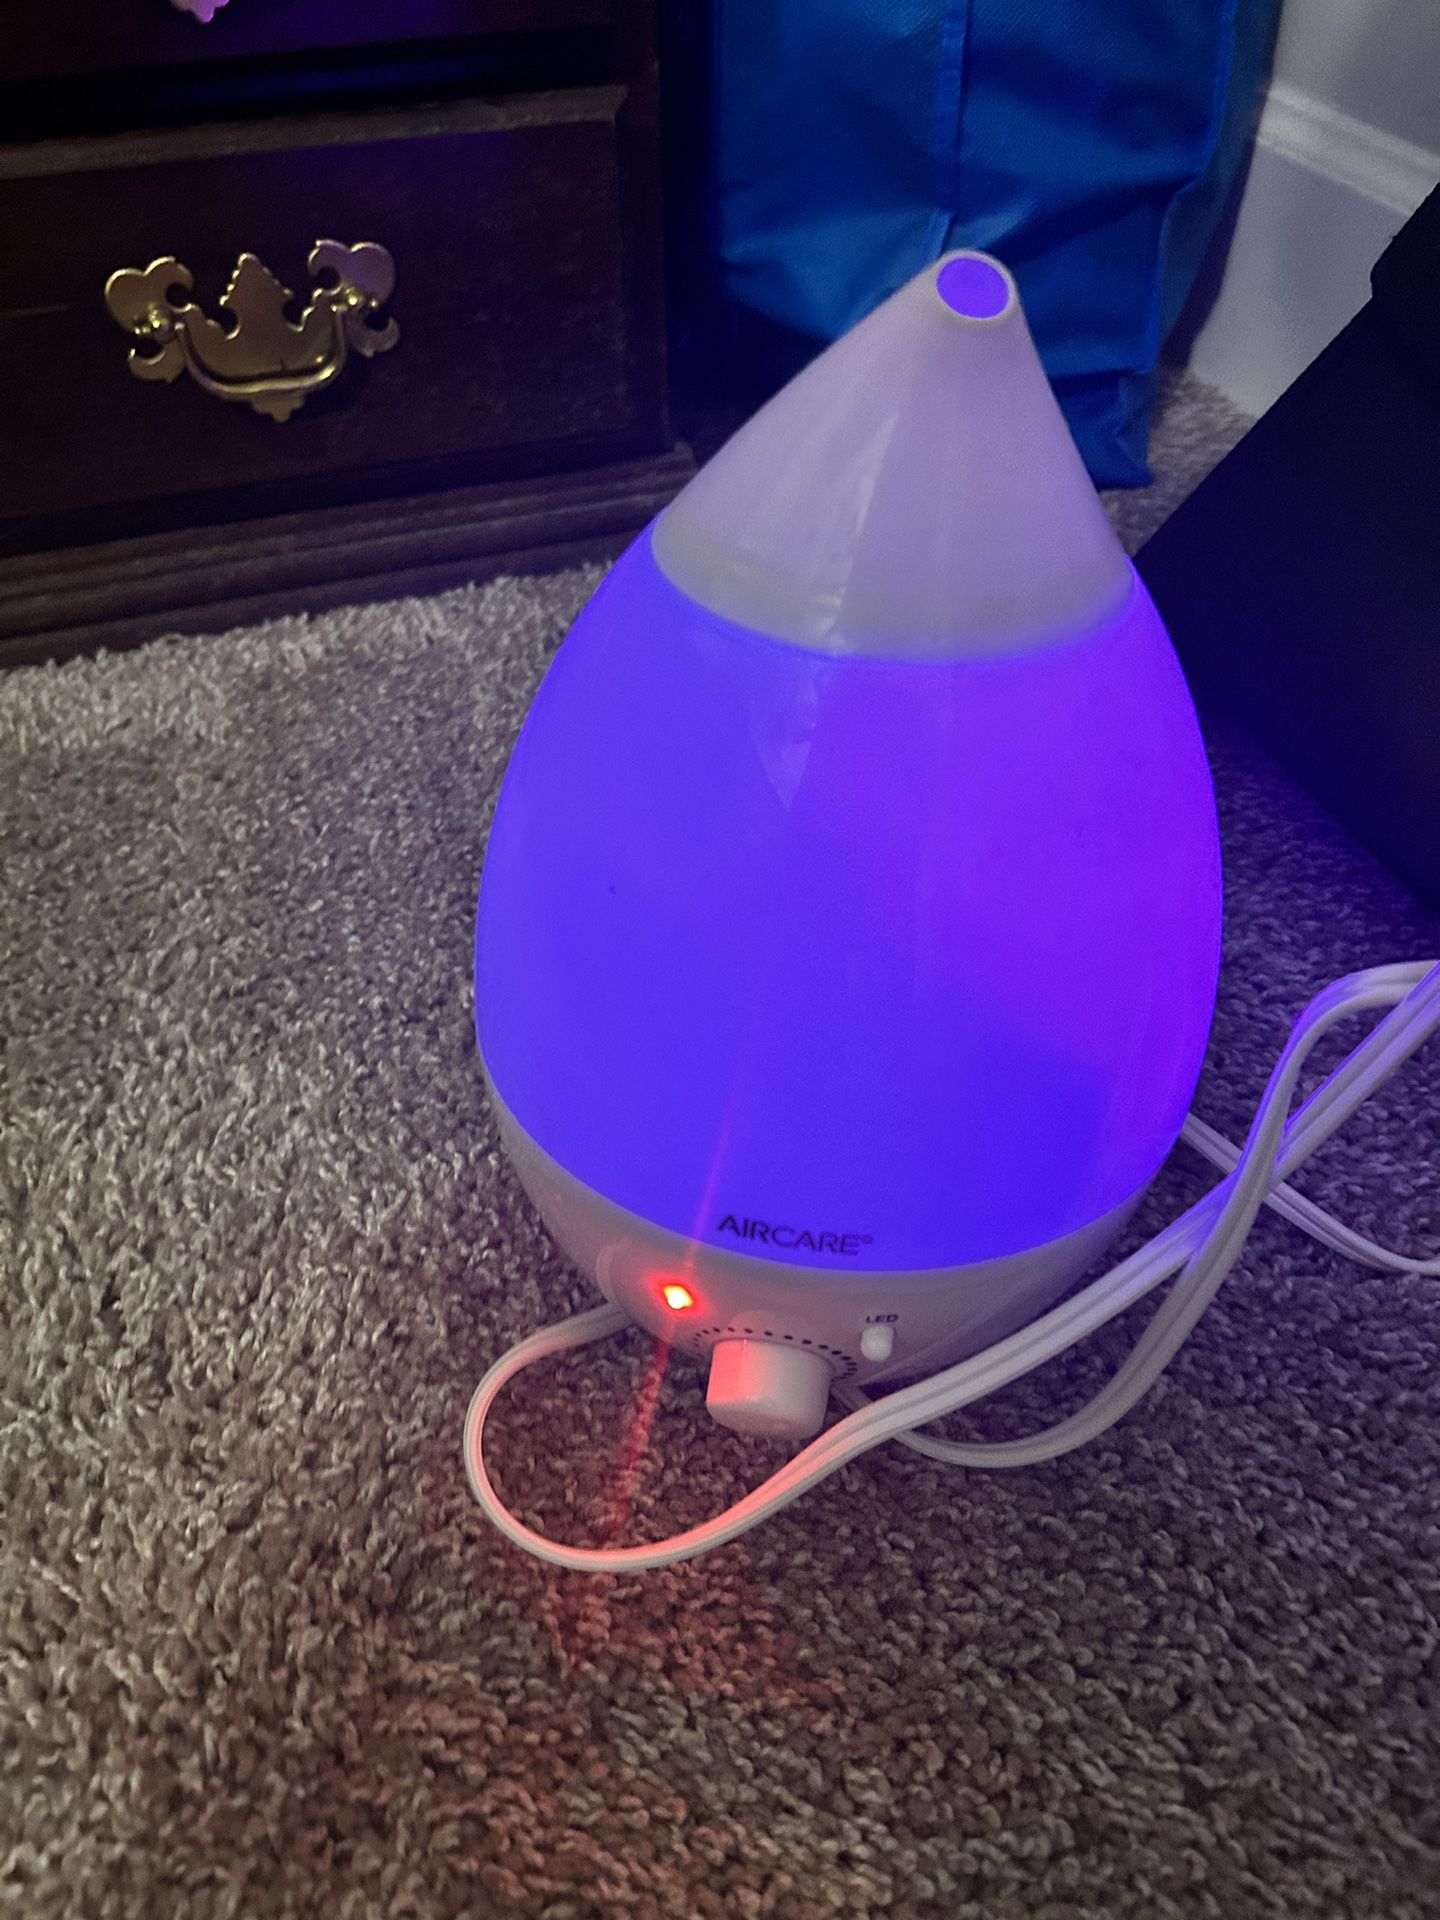 Aircare Humidifier With Multi Color Lamp